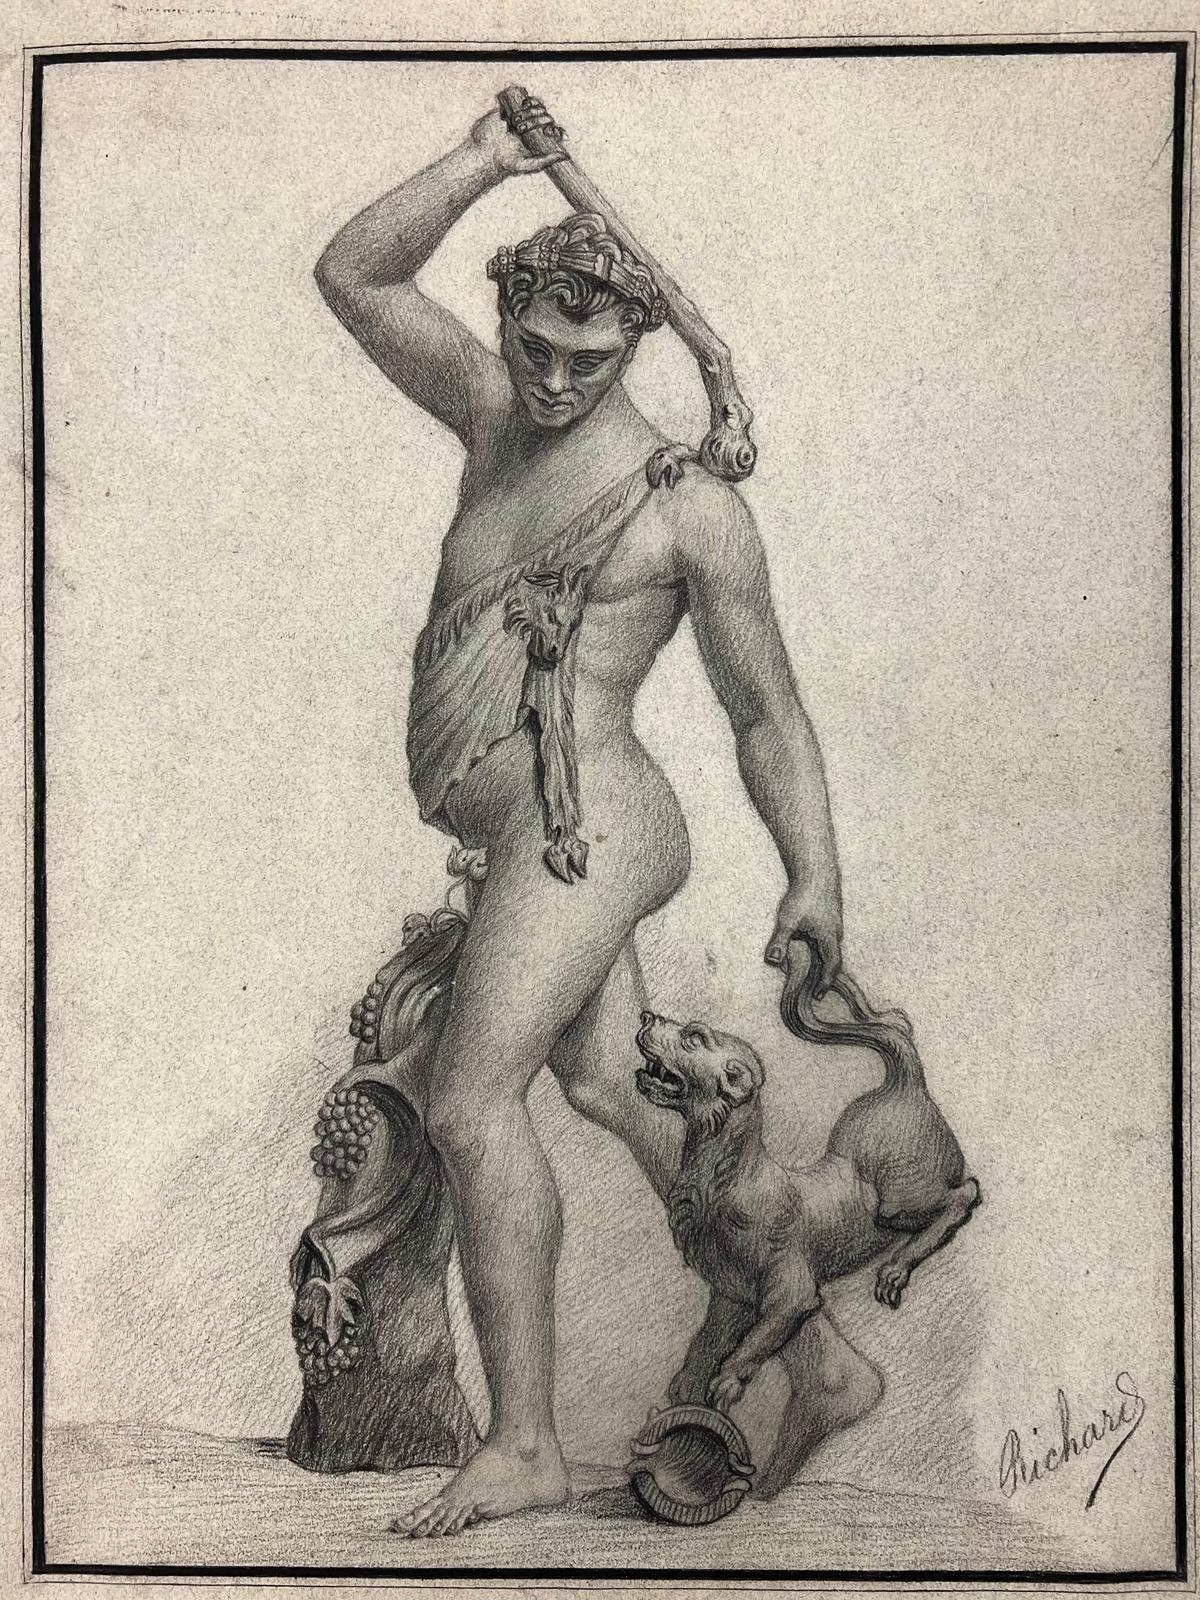 Bacchanalian Man, holding vine stump with dog
Circa 1800’s
French artist, signed Richard
Pencil drawing on paper, unframed
13 x 11 inches
private collection, France
the painting is in overall very good and sound condition for its age